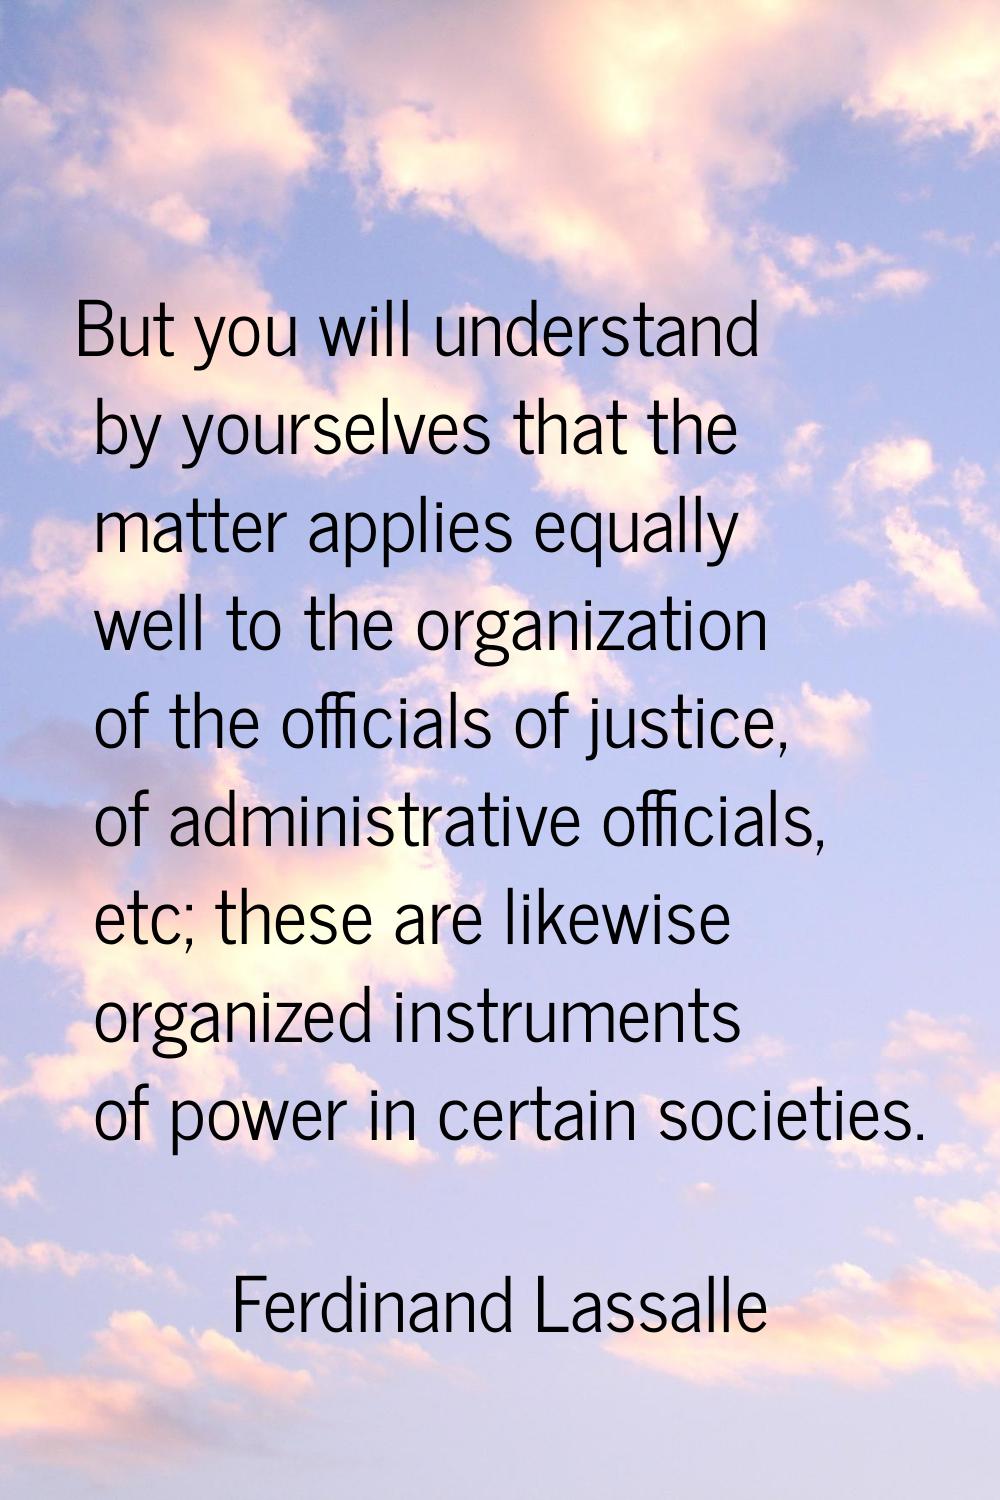 But you will understand by yourselves that the matter applies equally well to the organization of t